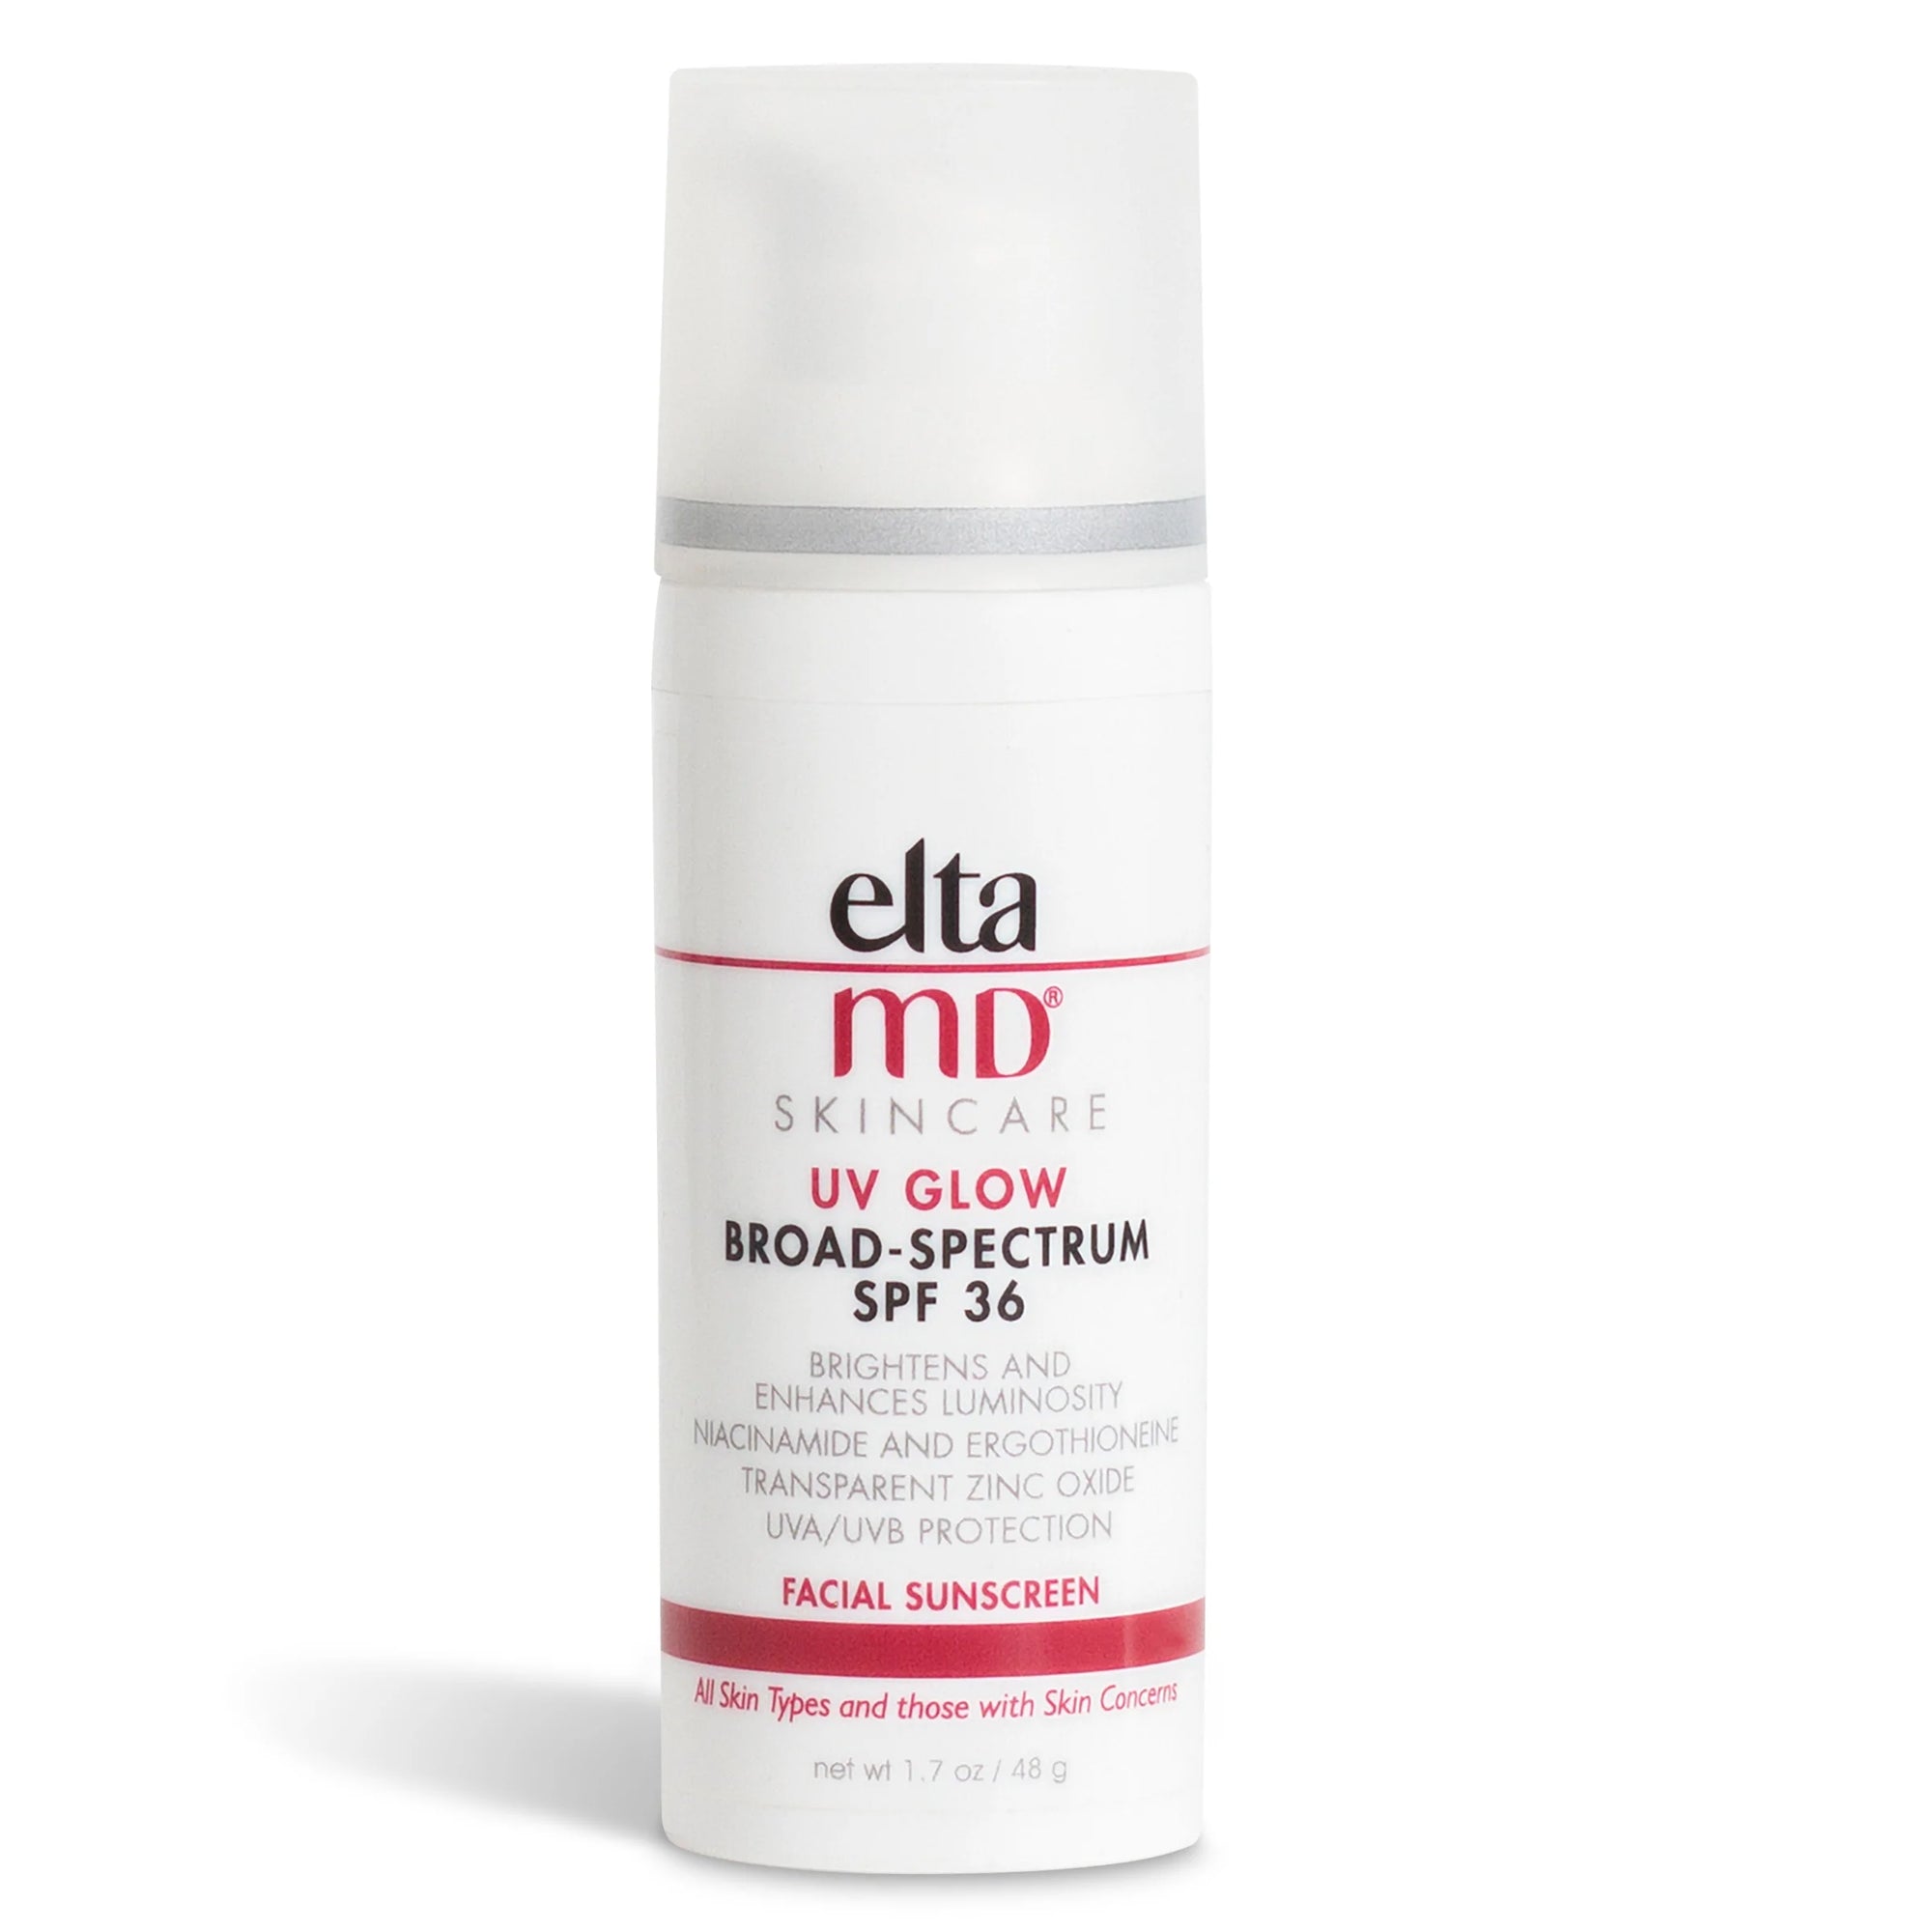 Elta MD | UV Glow Broad-Spectrum SPF 36 (Tinted or Non-Tinted)